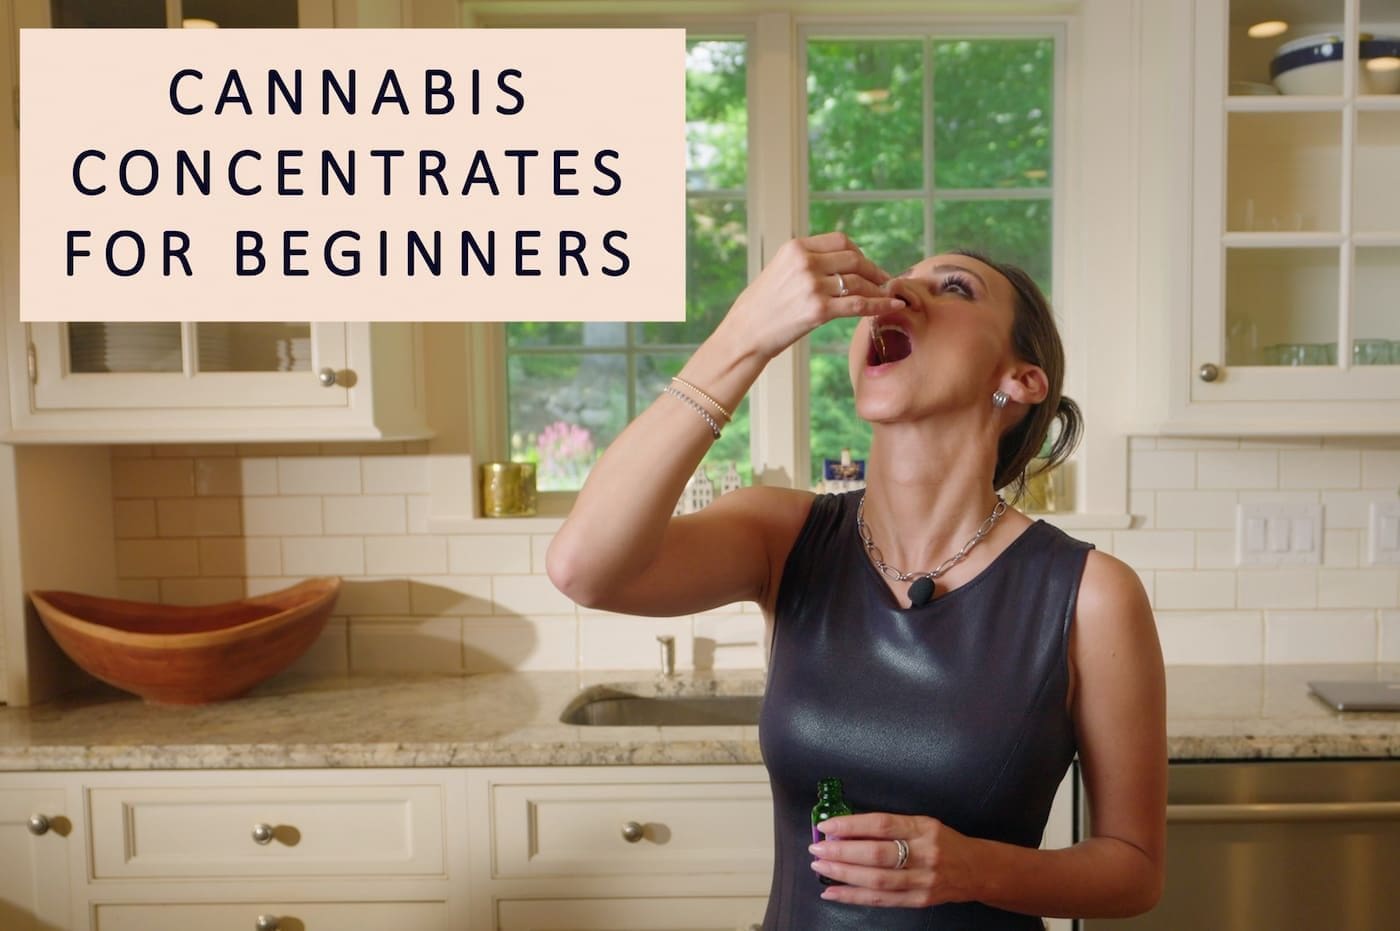 Enjoy our high culture introduction to cannabis concentrates for beginners